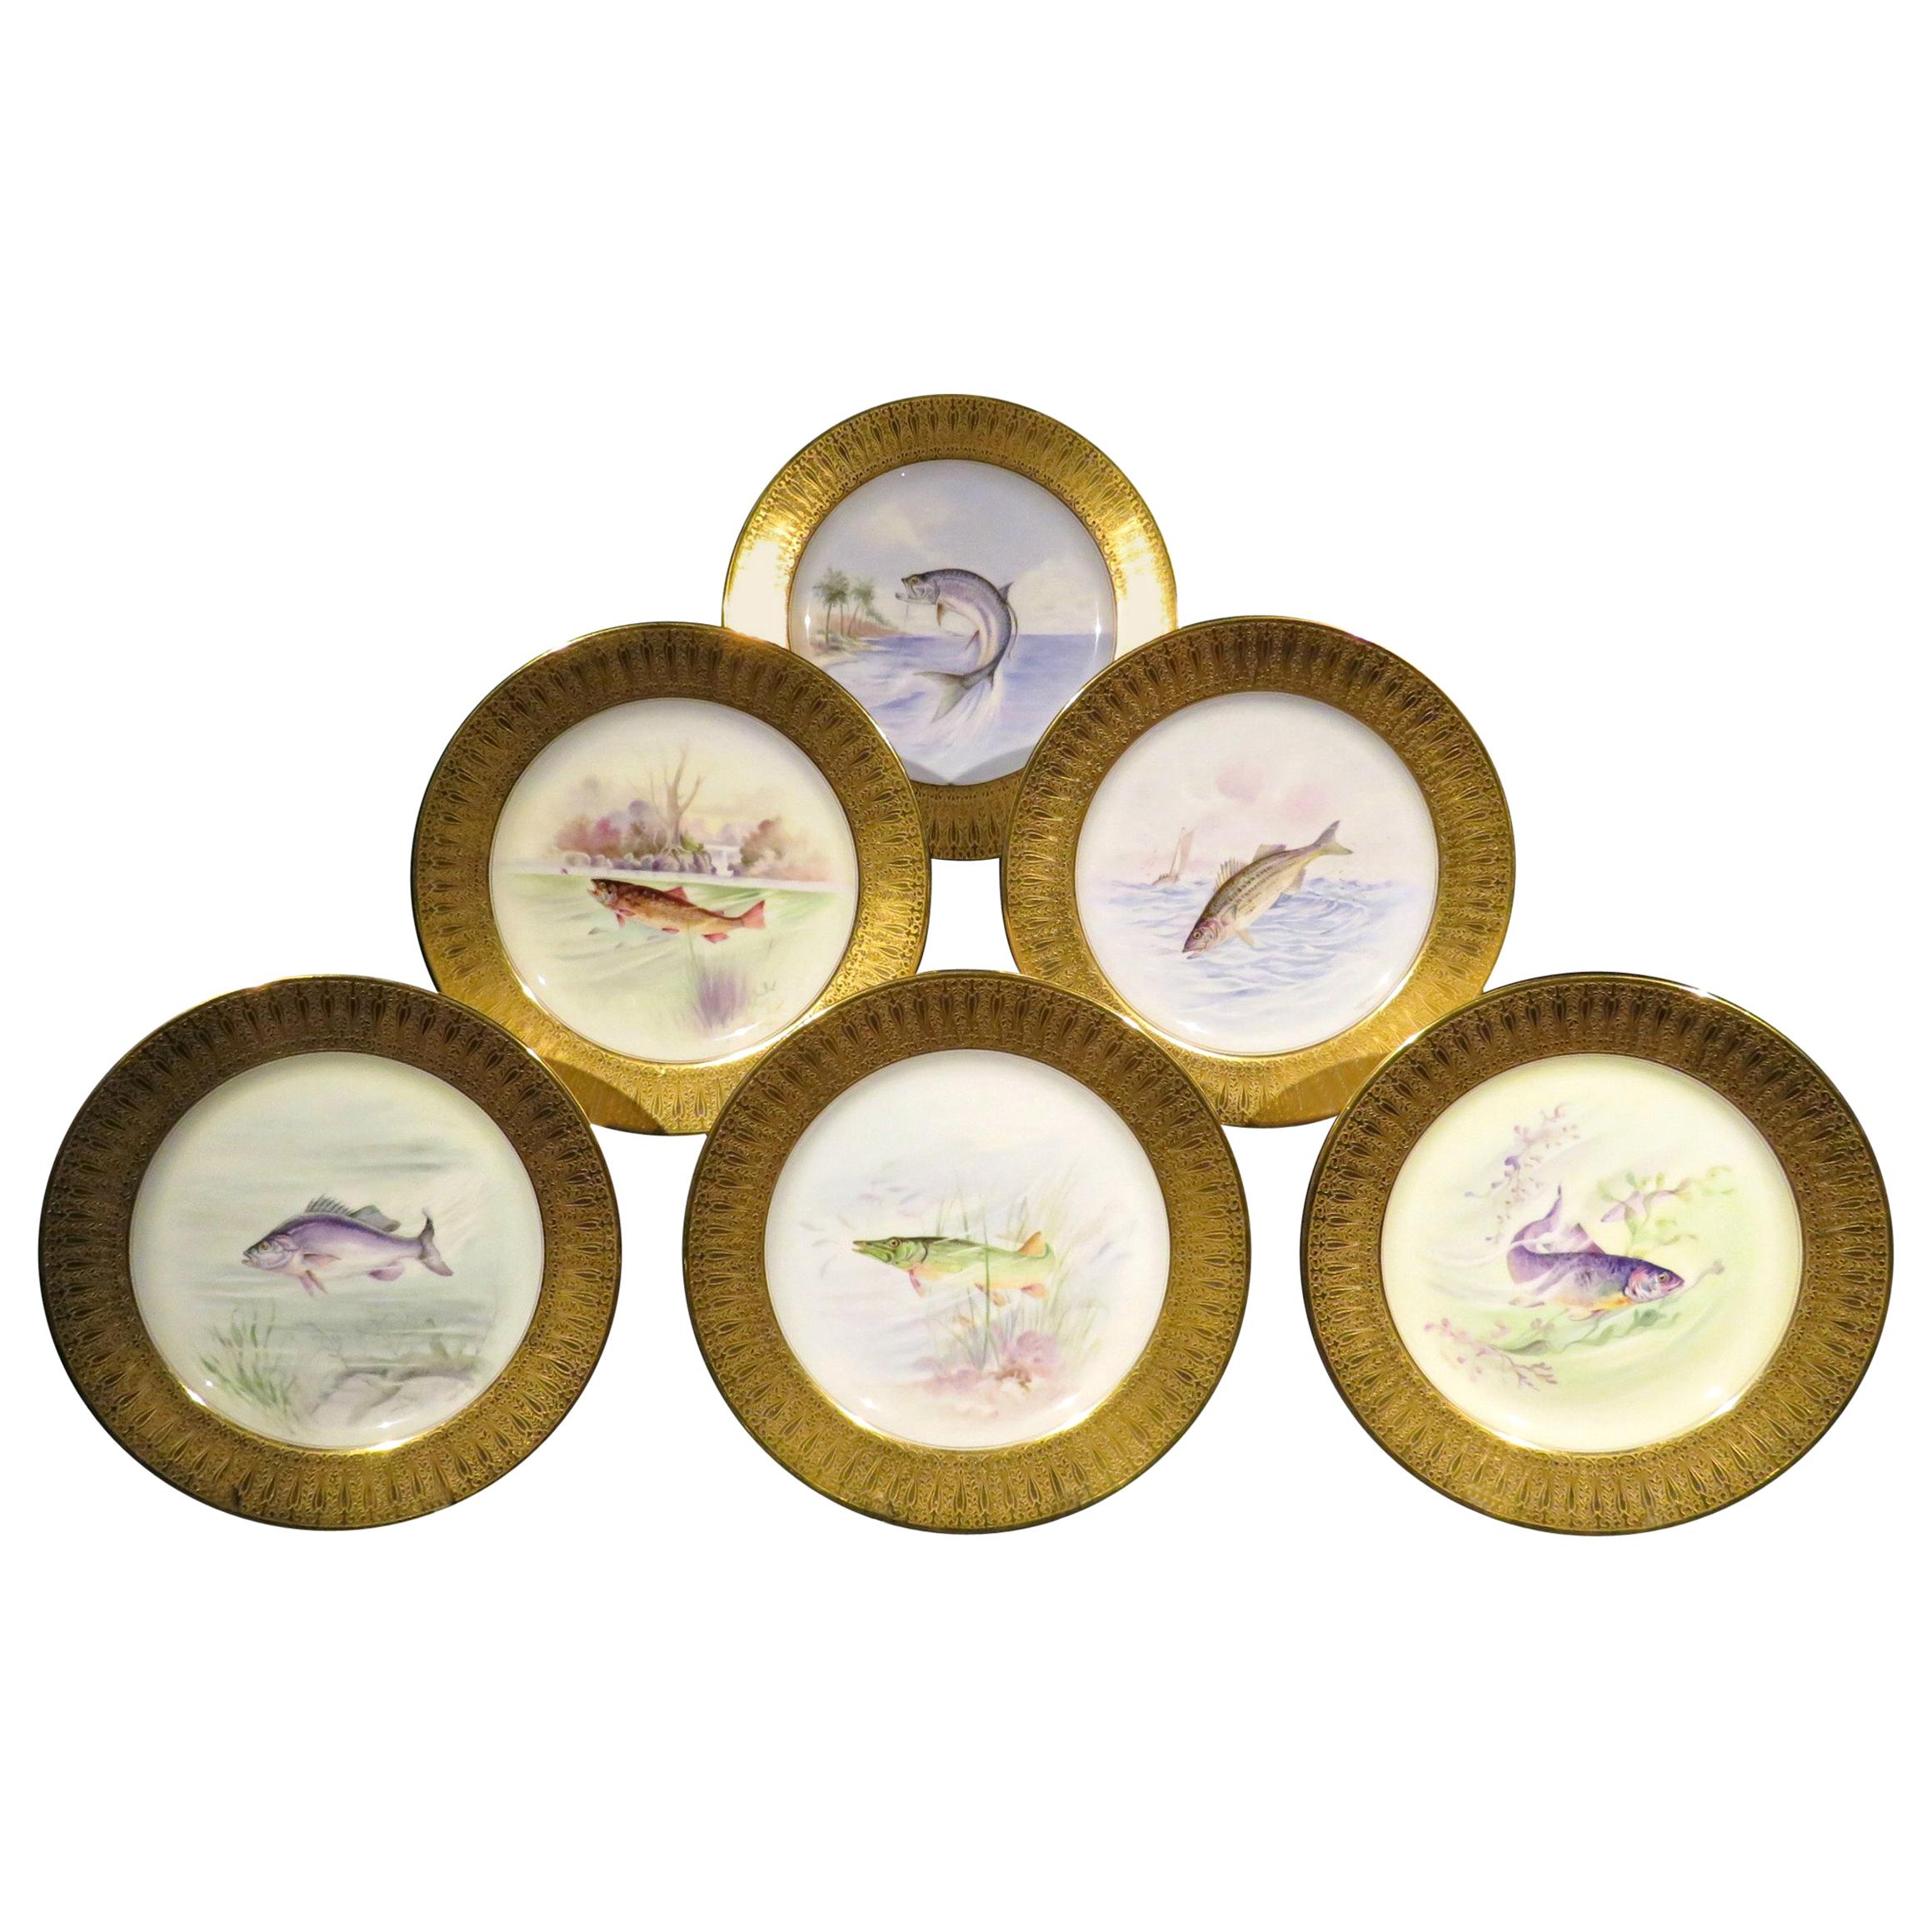 Very Fine Set of 6 Hand Painted Lenox Porcelain Cabinet Plates for Tiffany & Co.